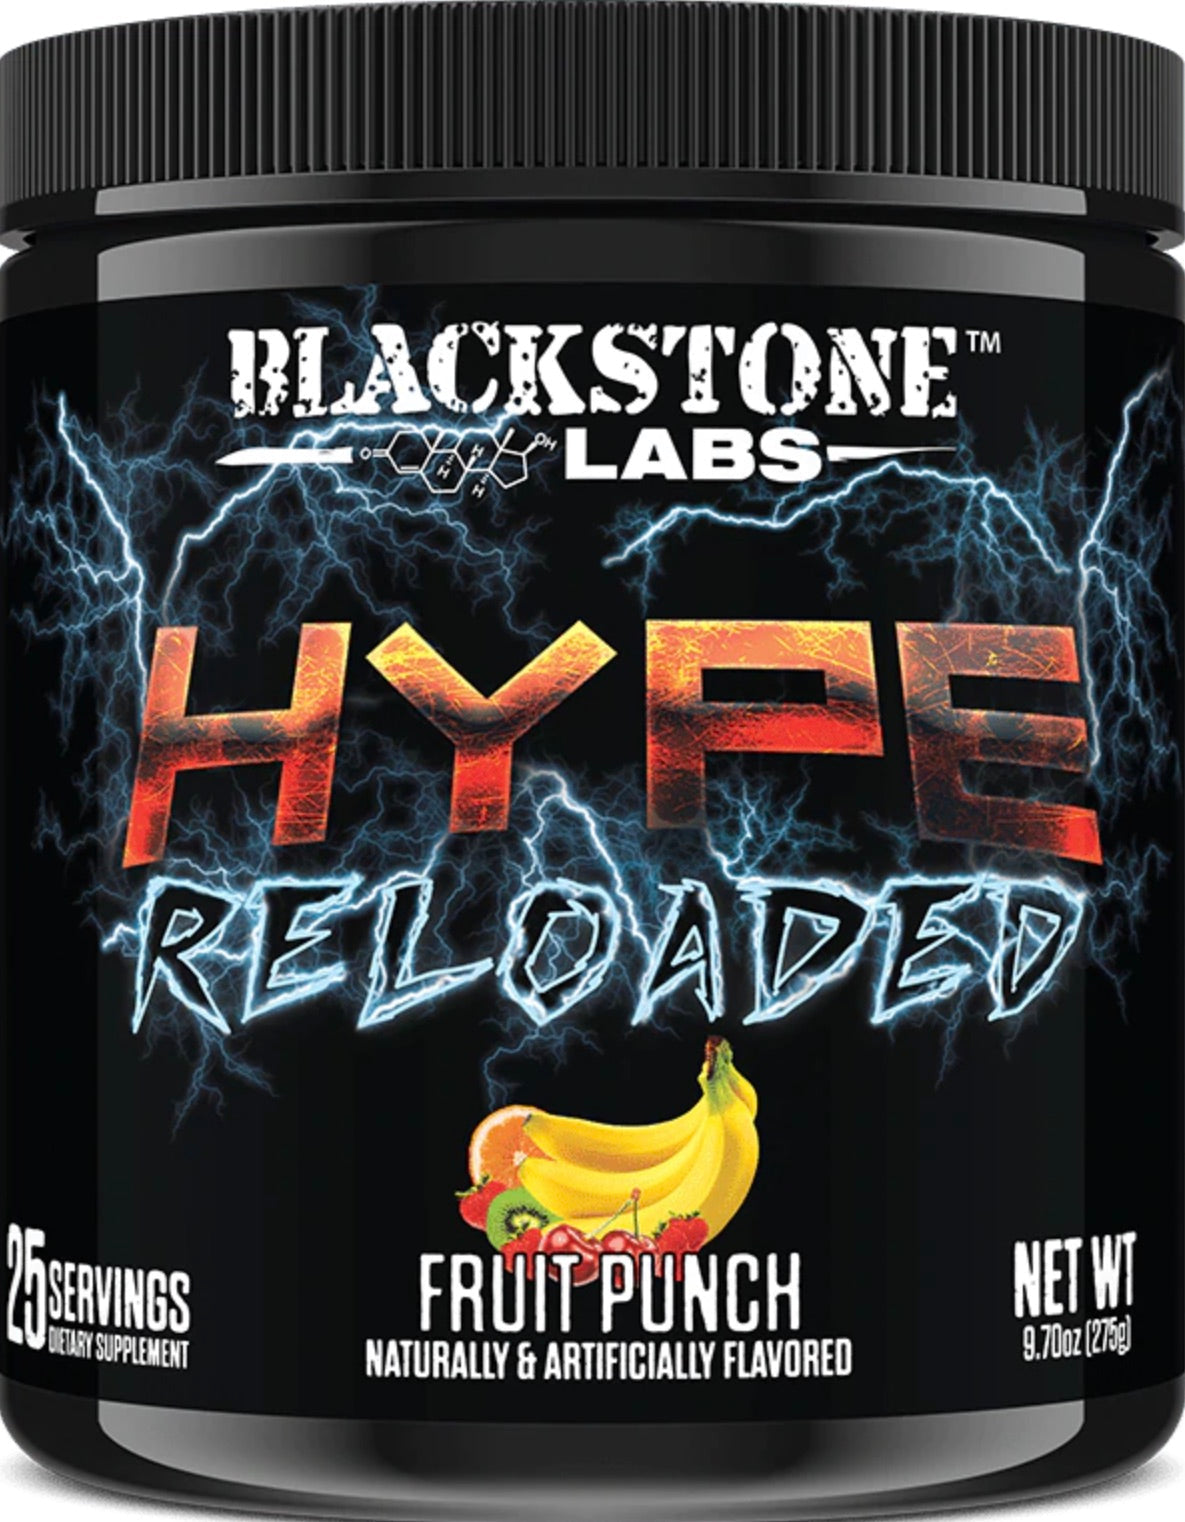 Hype Reloaded - Blackstone Labs - Prime Sports Nutrition